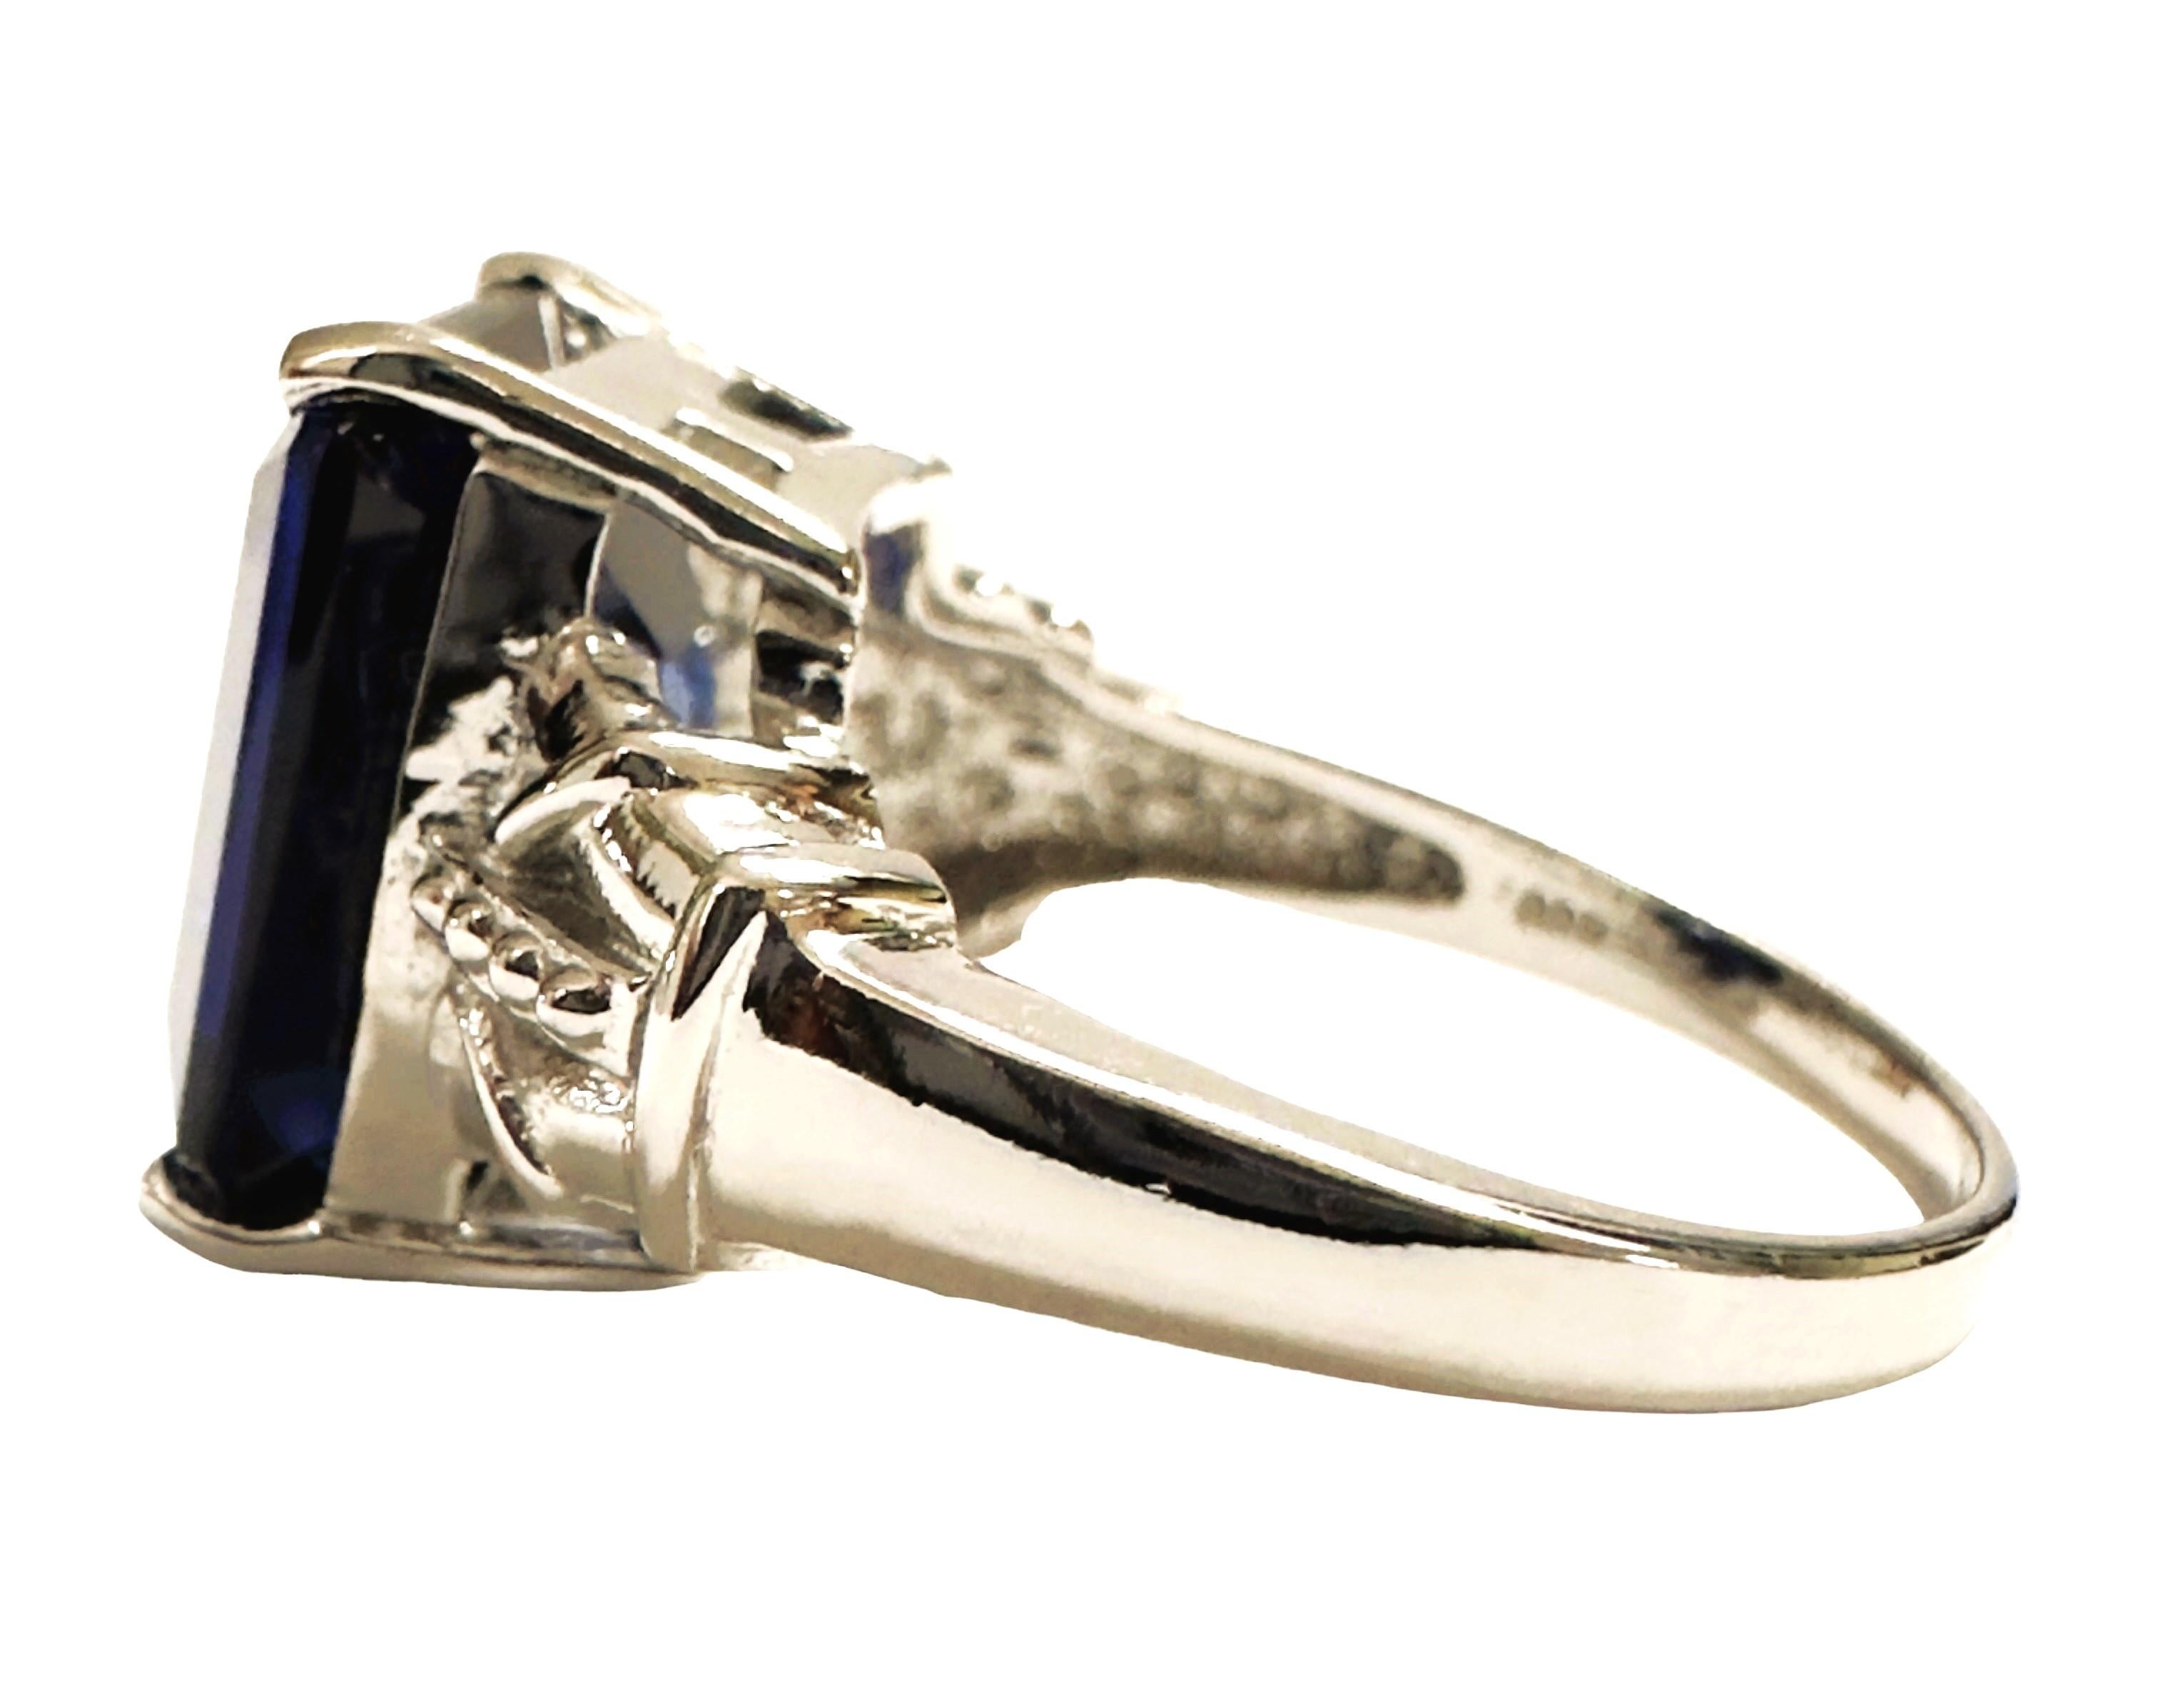 The ring is a size 6.5 and has just a beautiful and brilliant sapphire stone.  It was mined in Africa.  It is a high quality stone. The IF stands for 